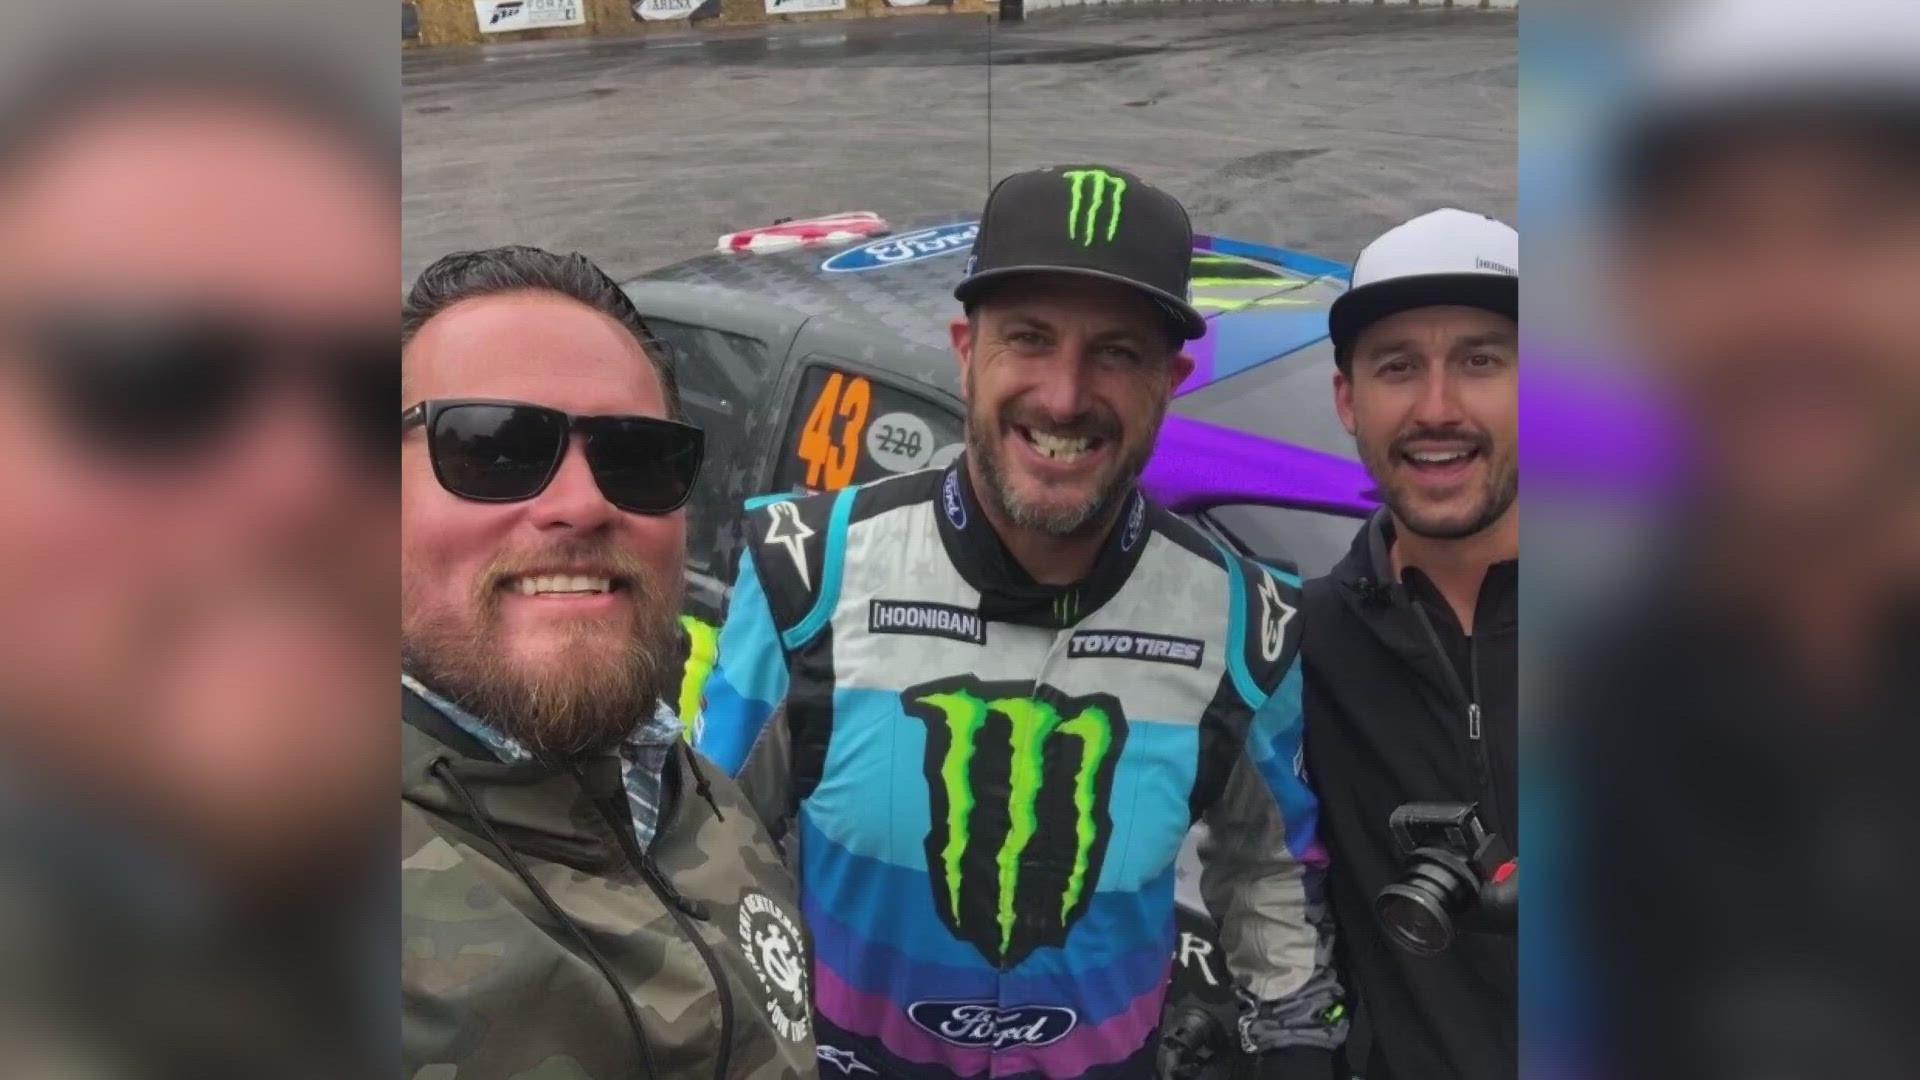 Drivers said action sports star Ken Block inspired a generation of Maine car lovers.